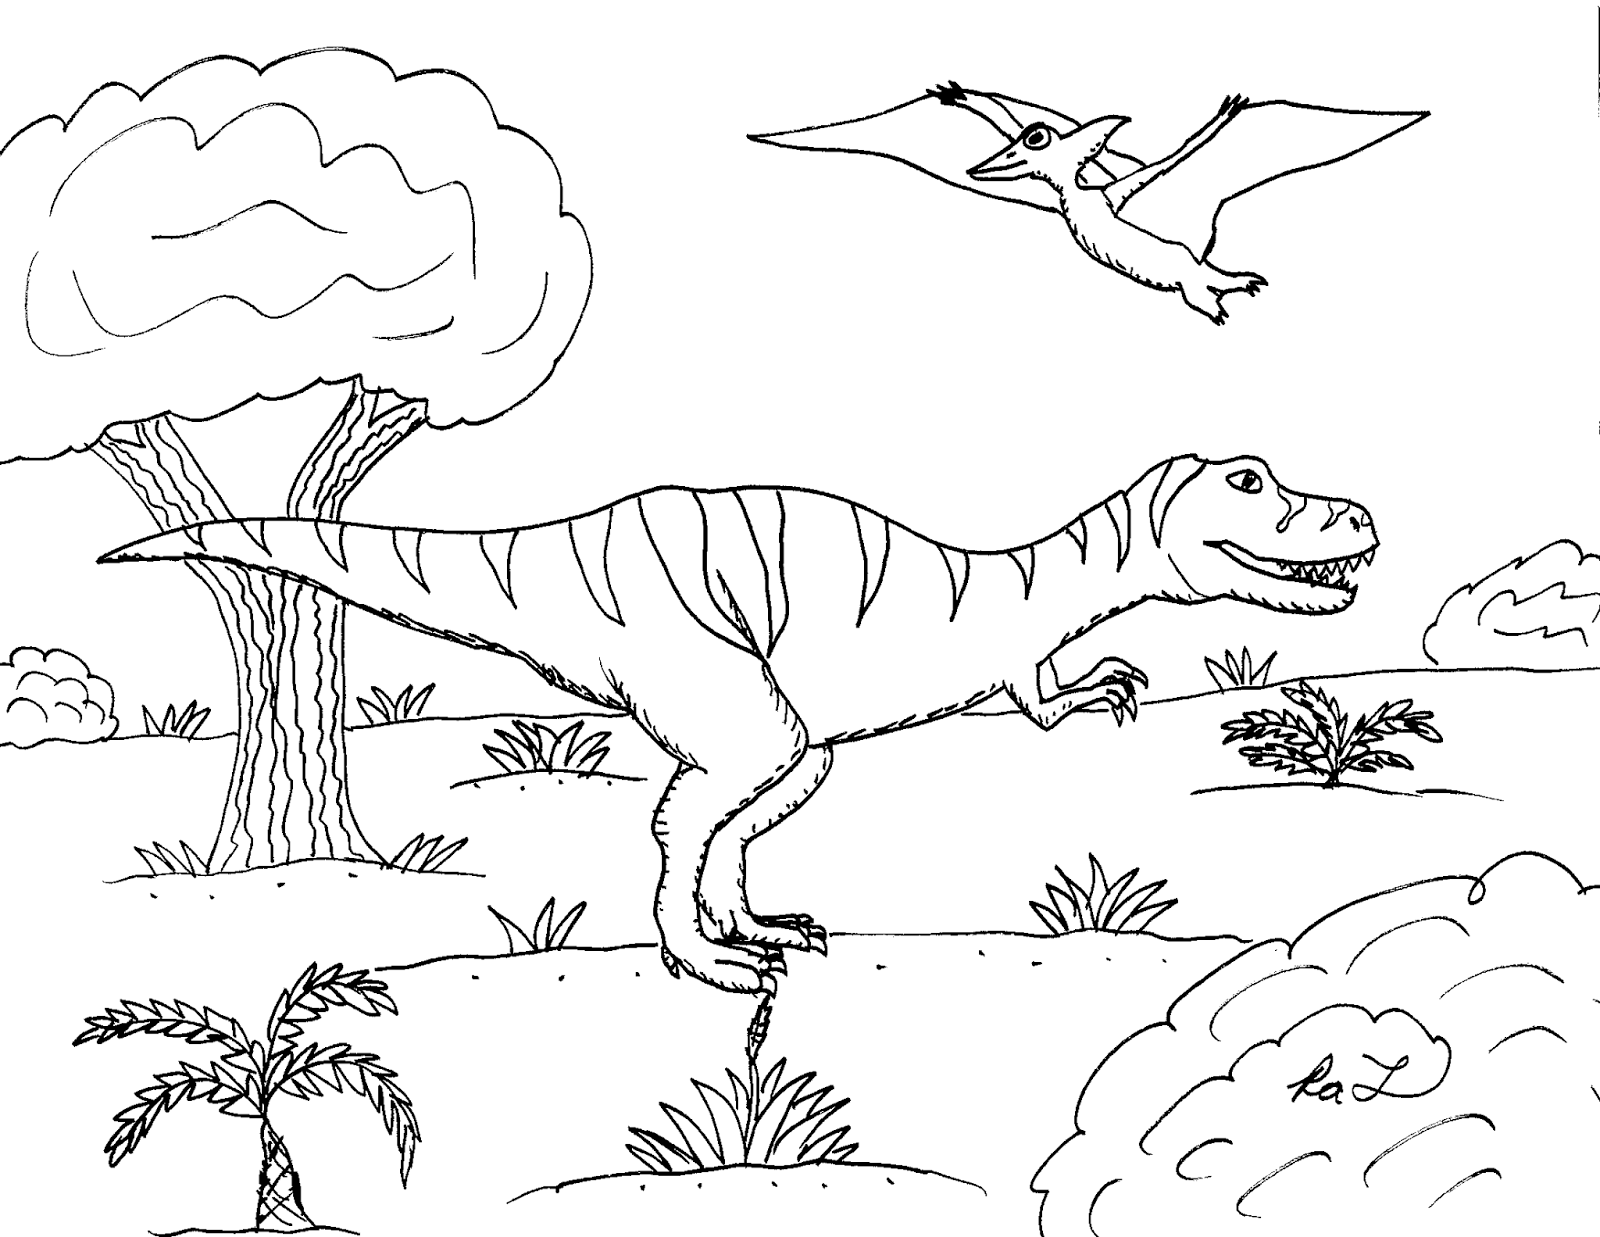 Robin's Great Coloring Pages: Dinosaur Train fan art